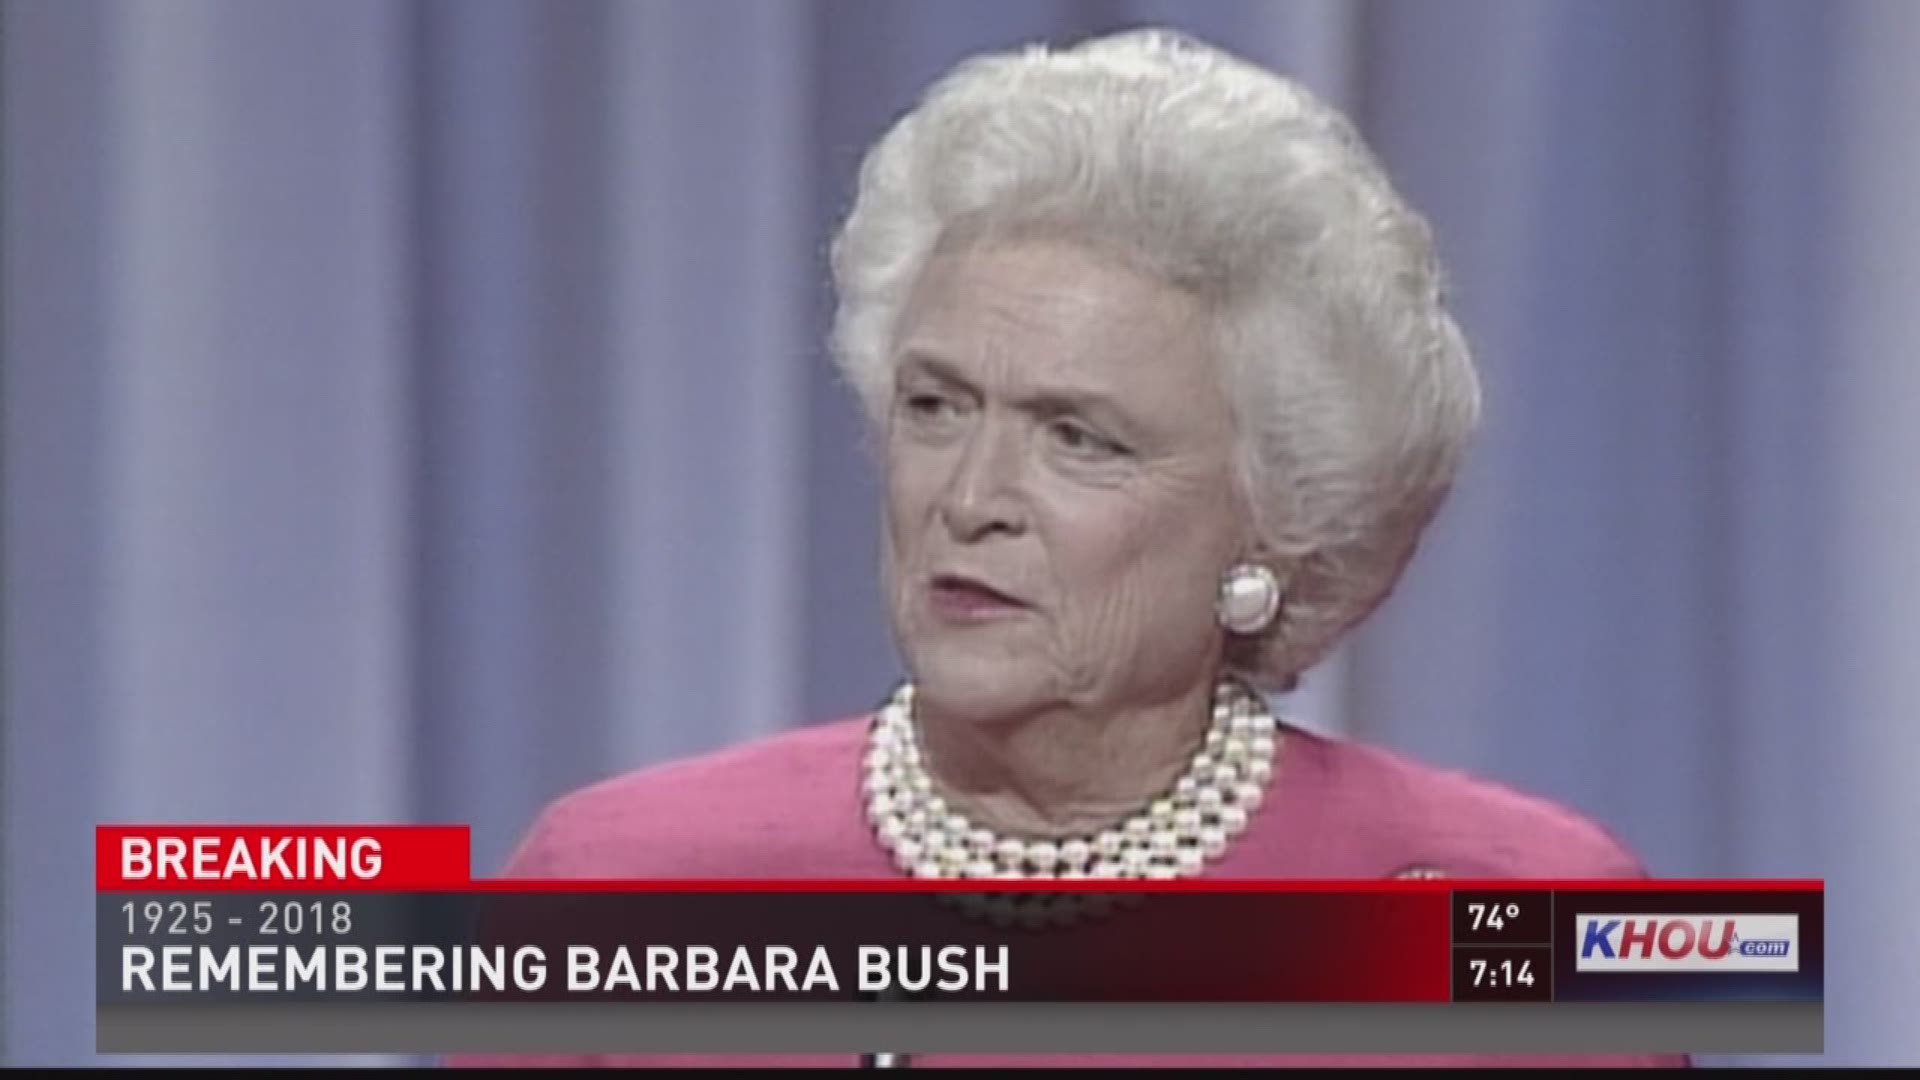 Take a look back at the life and legacy of former first lady Barbara Bush, who died April 17, 2018, at the age of 92.